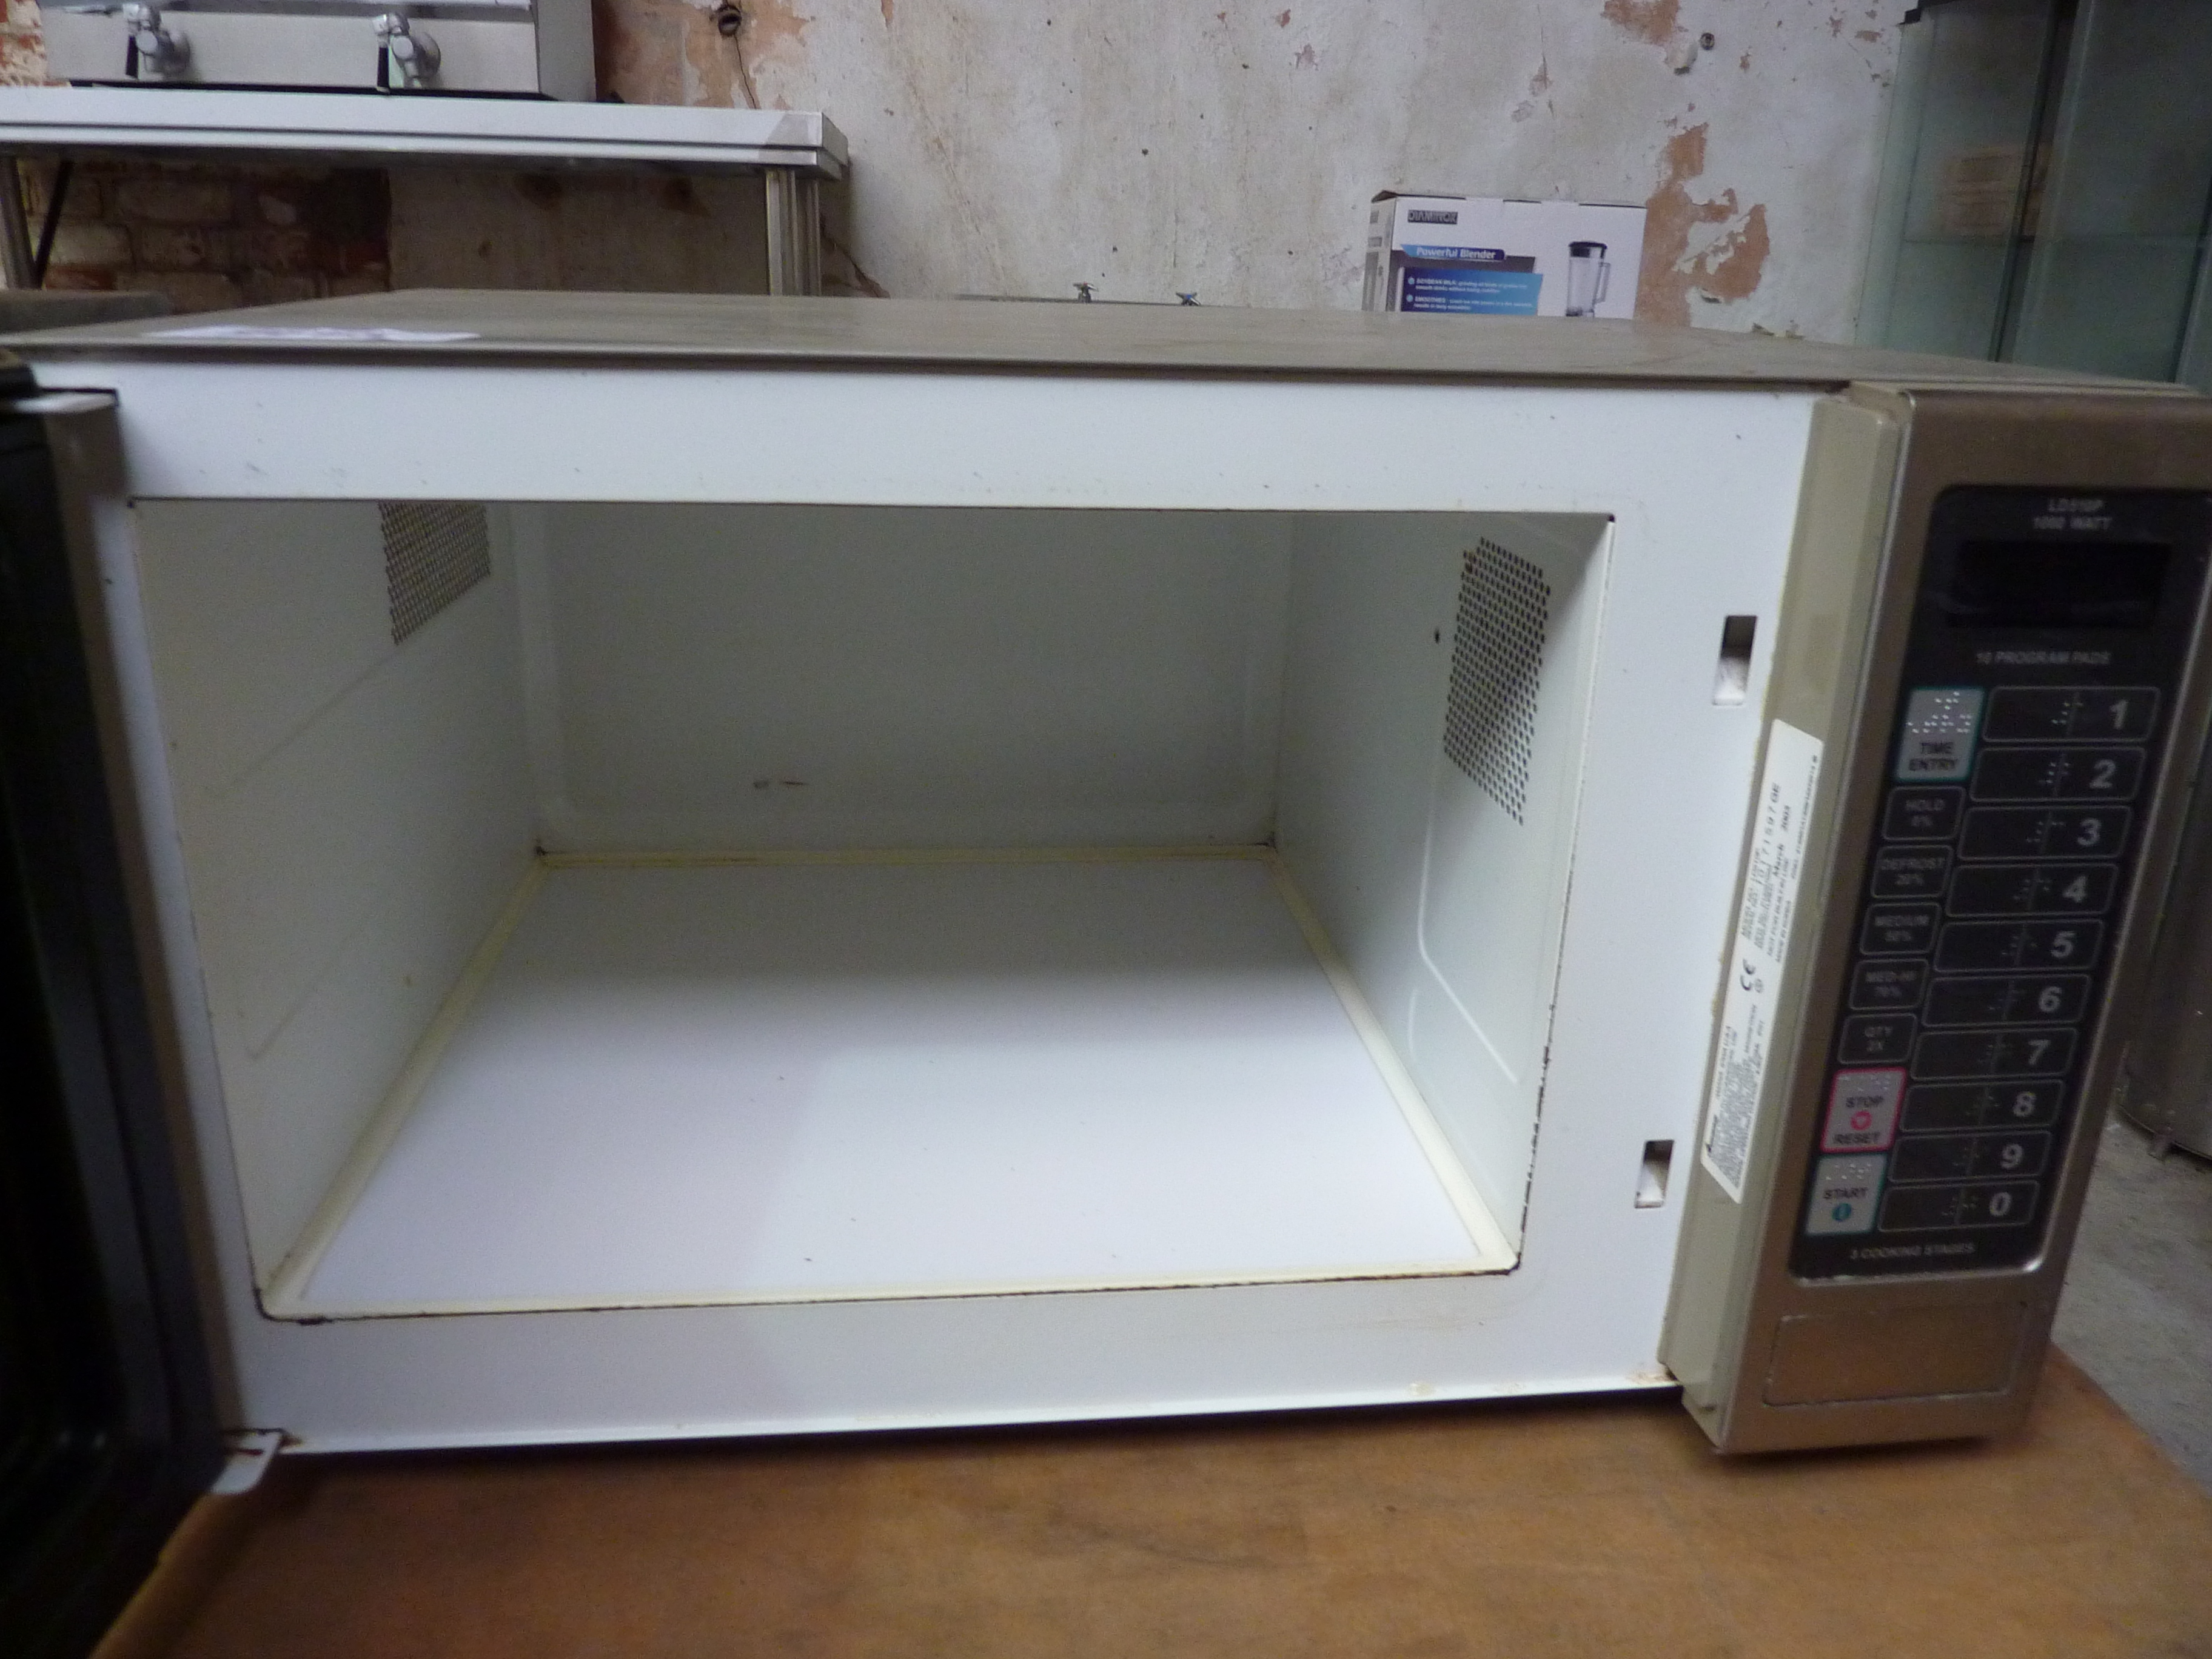 Amana commercial microwave - Image 2 of 2